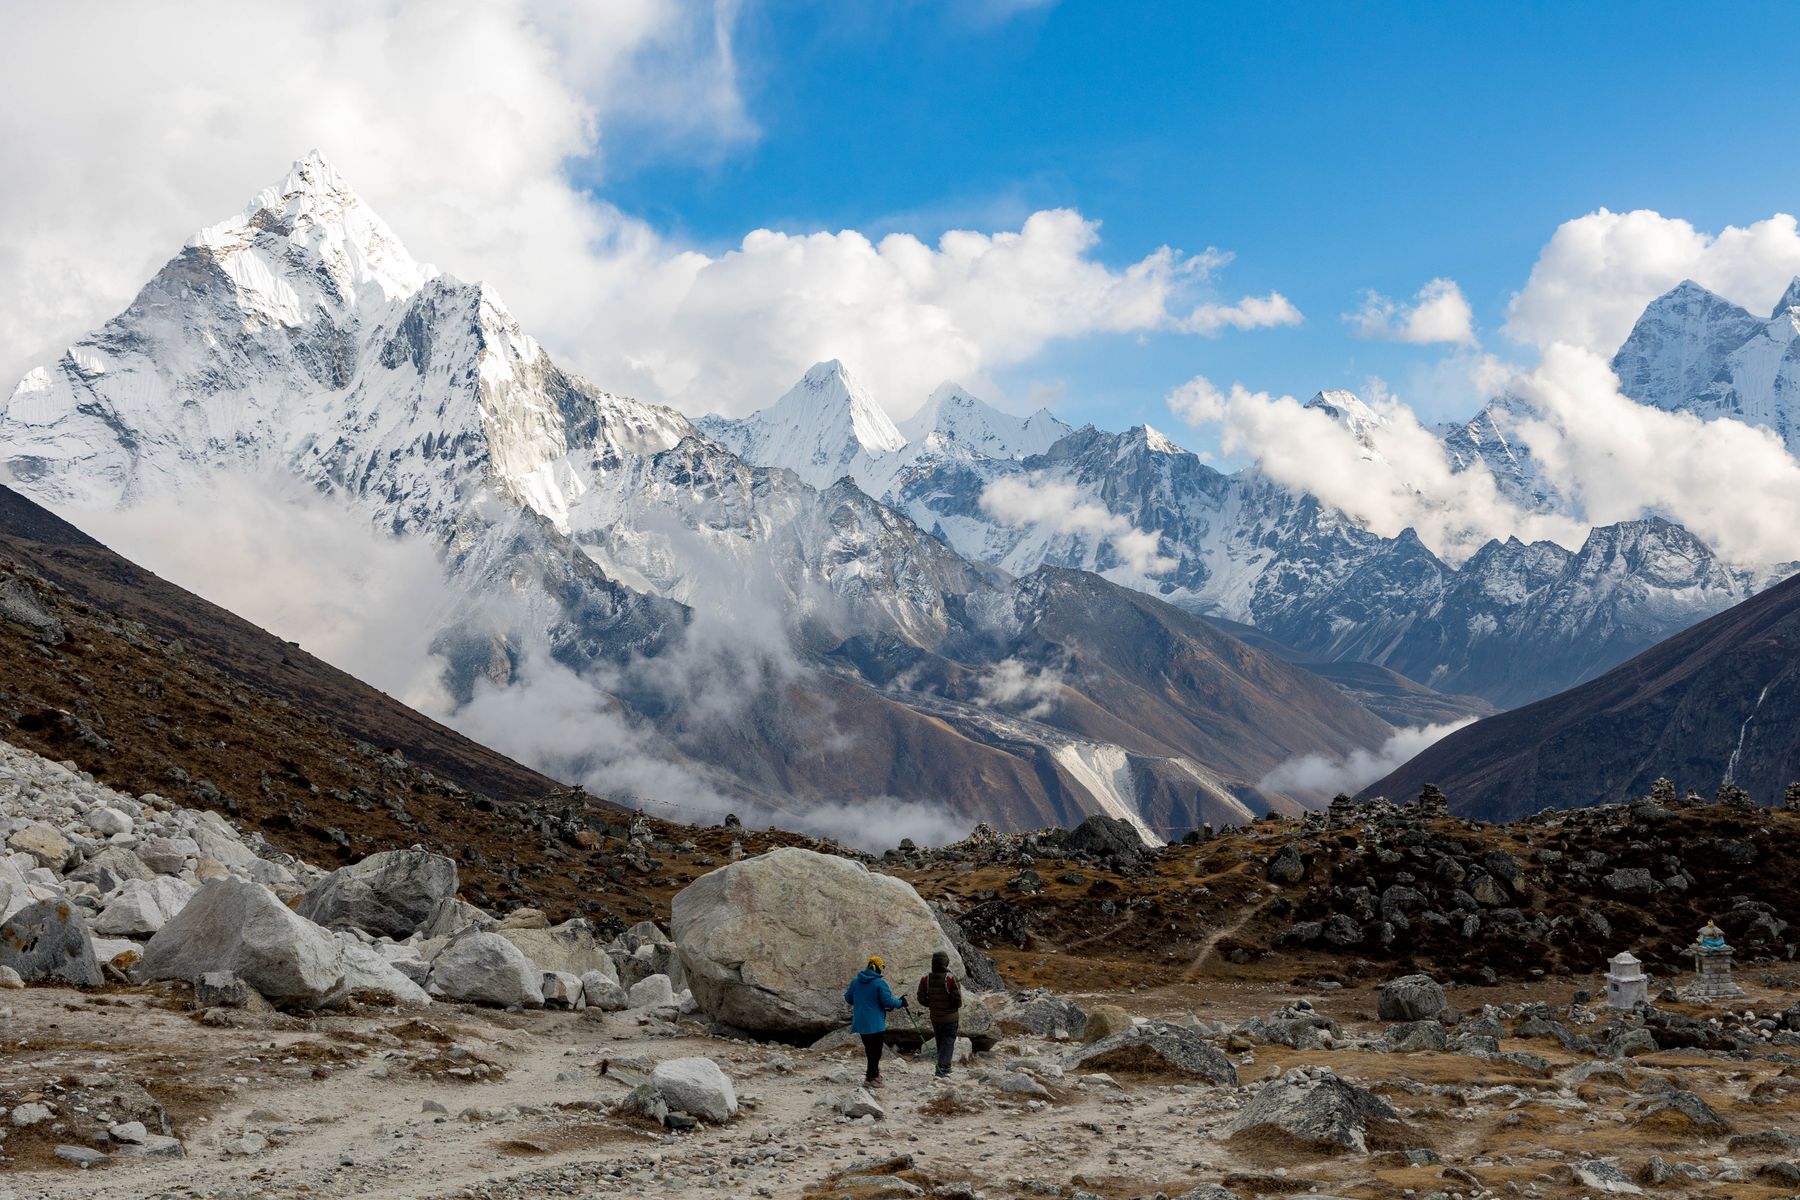 Trekking to Everest Base Camp: A Review, I Guess?